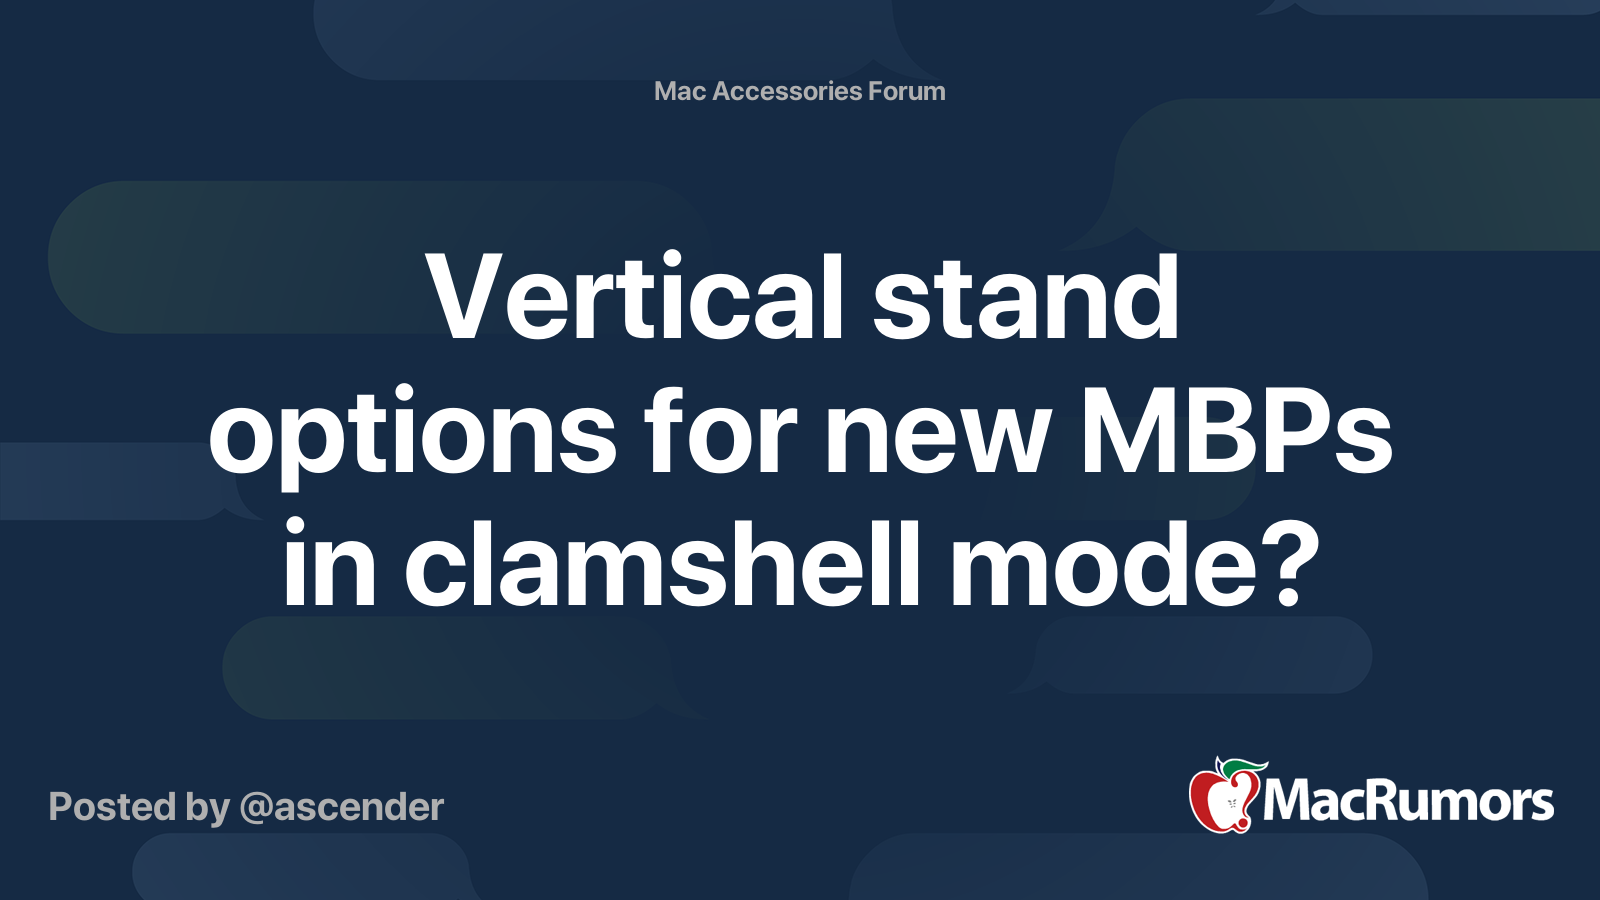 Vertical stand options for new MBPs in clamshell mode?